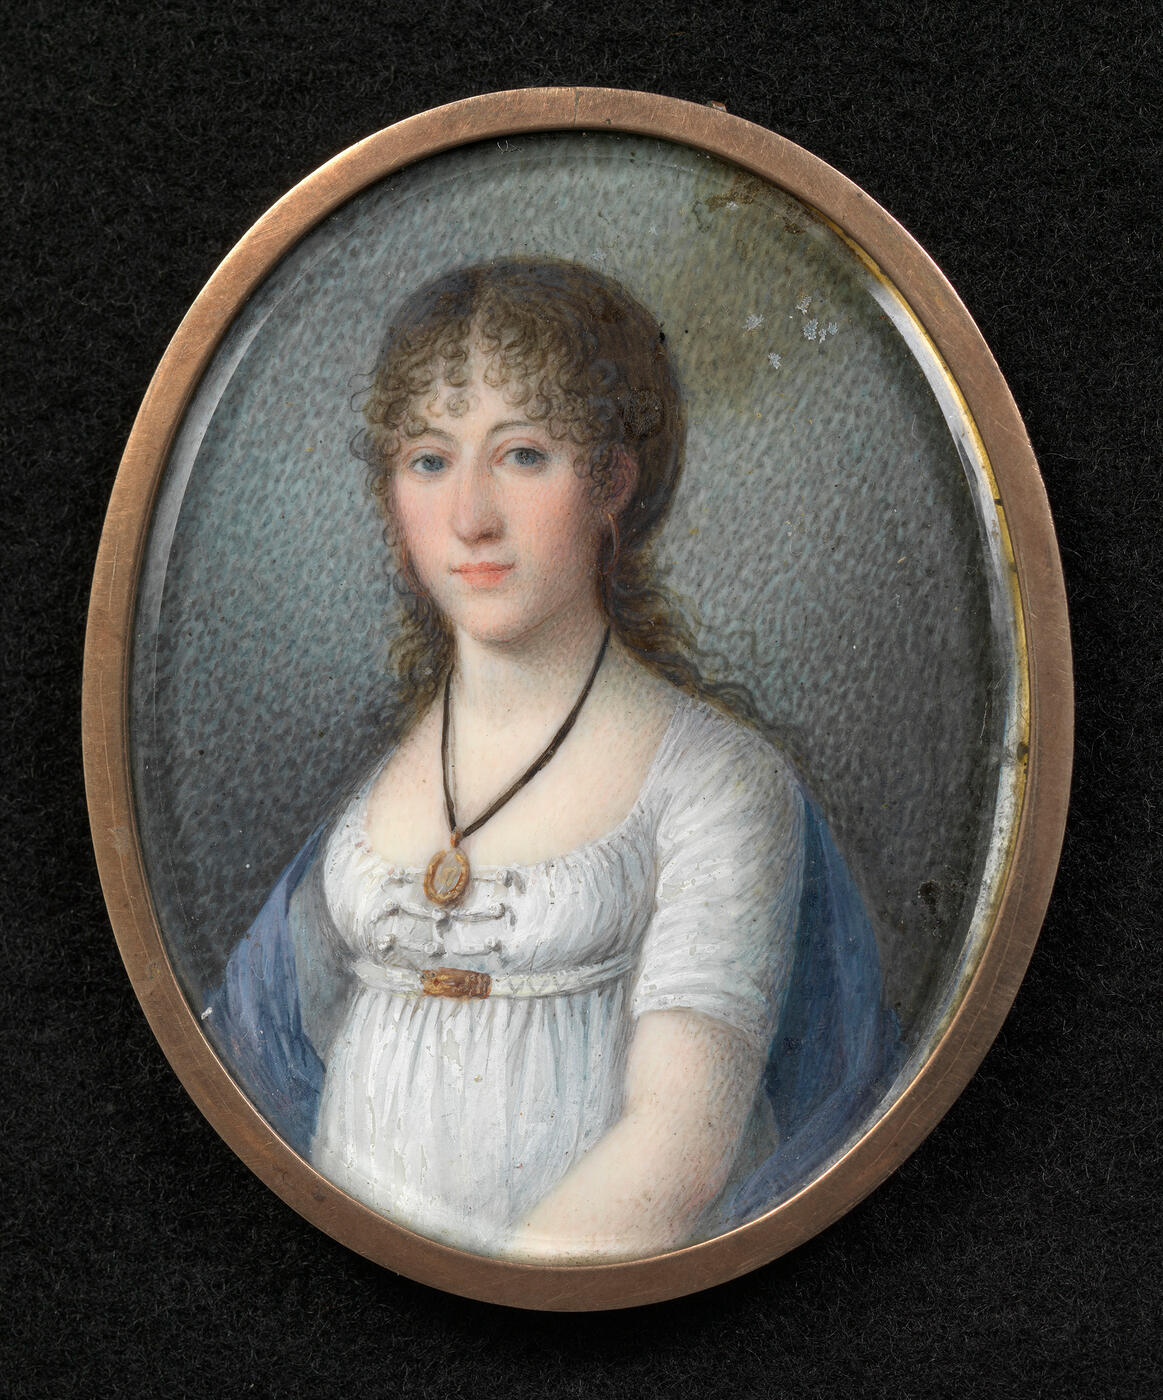 A PORTRAIT OF A YOUNG LADY WITH RINGLETS